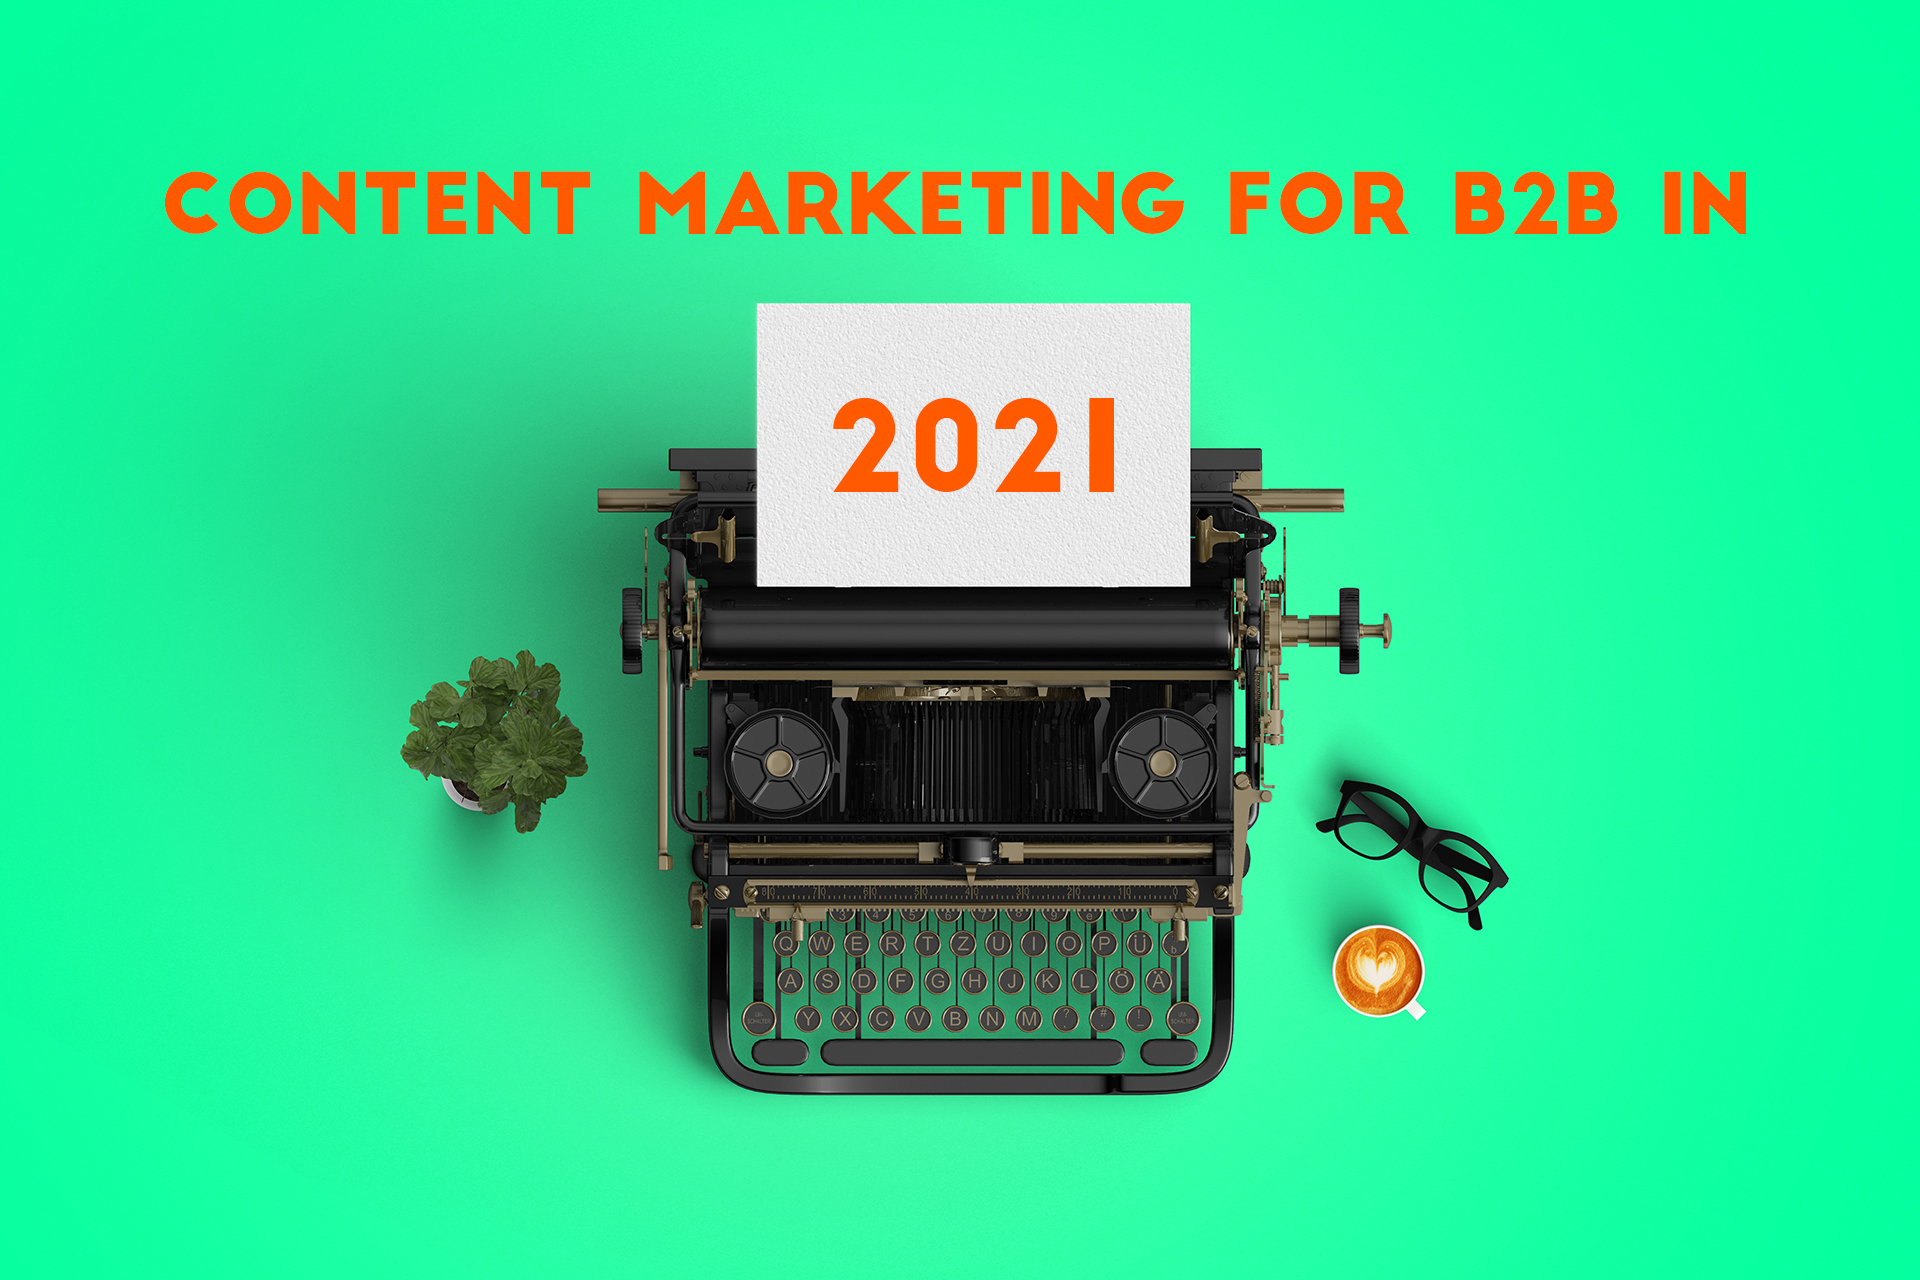 Content Marketing for B2B in 2021